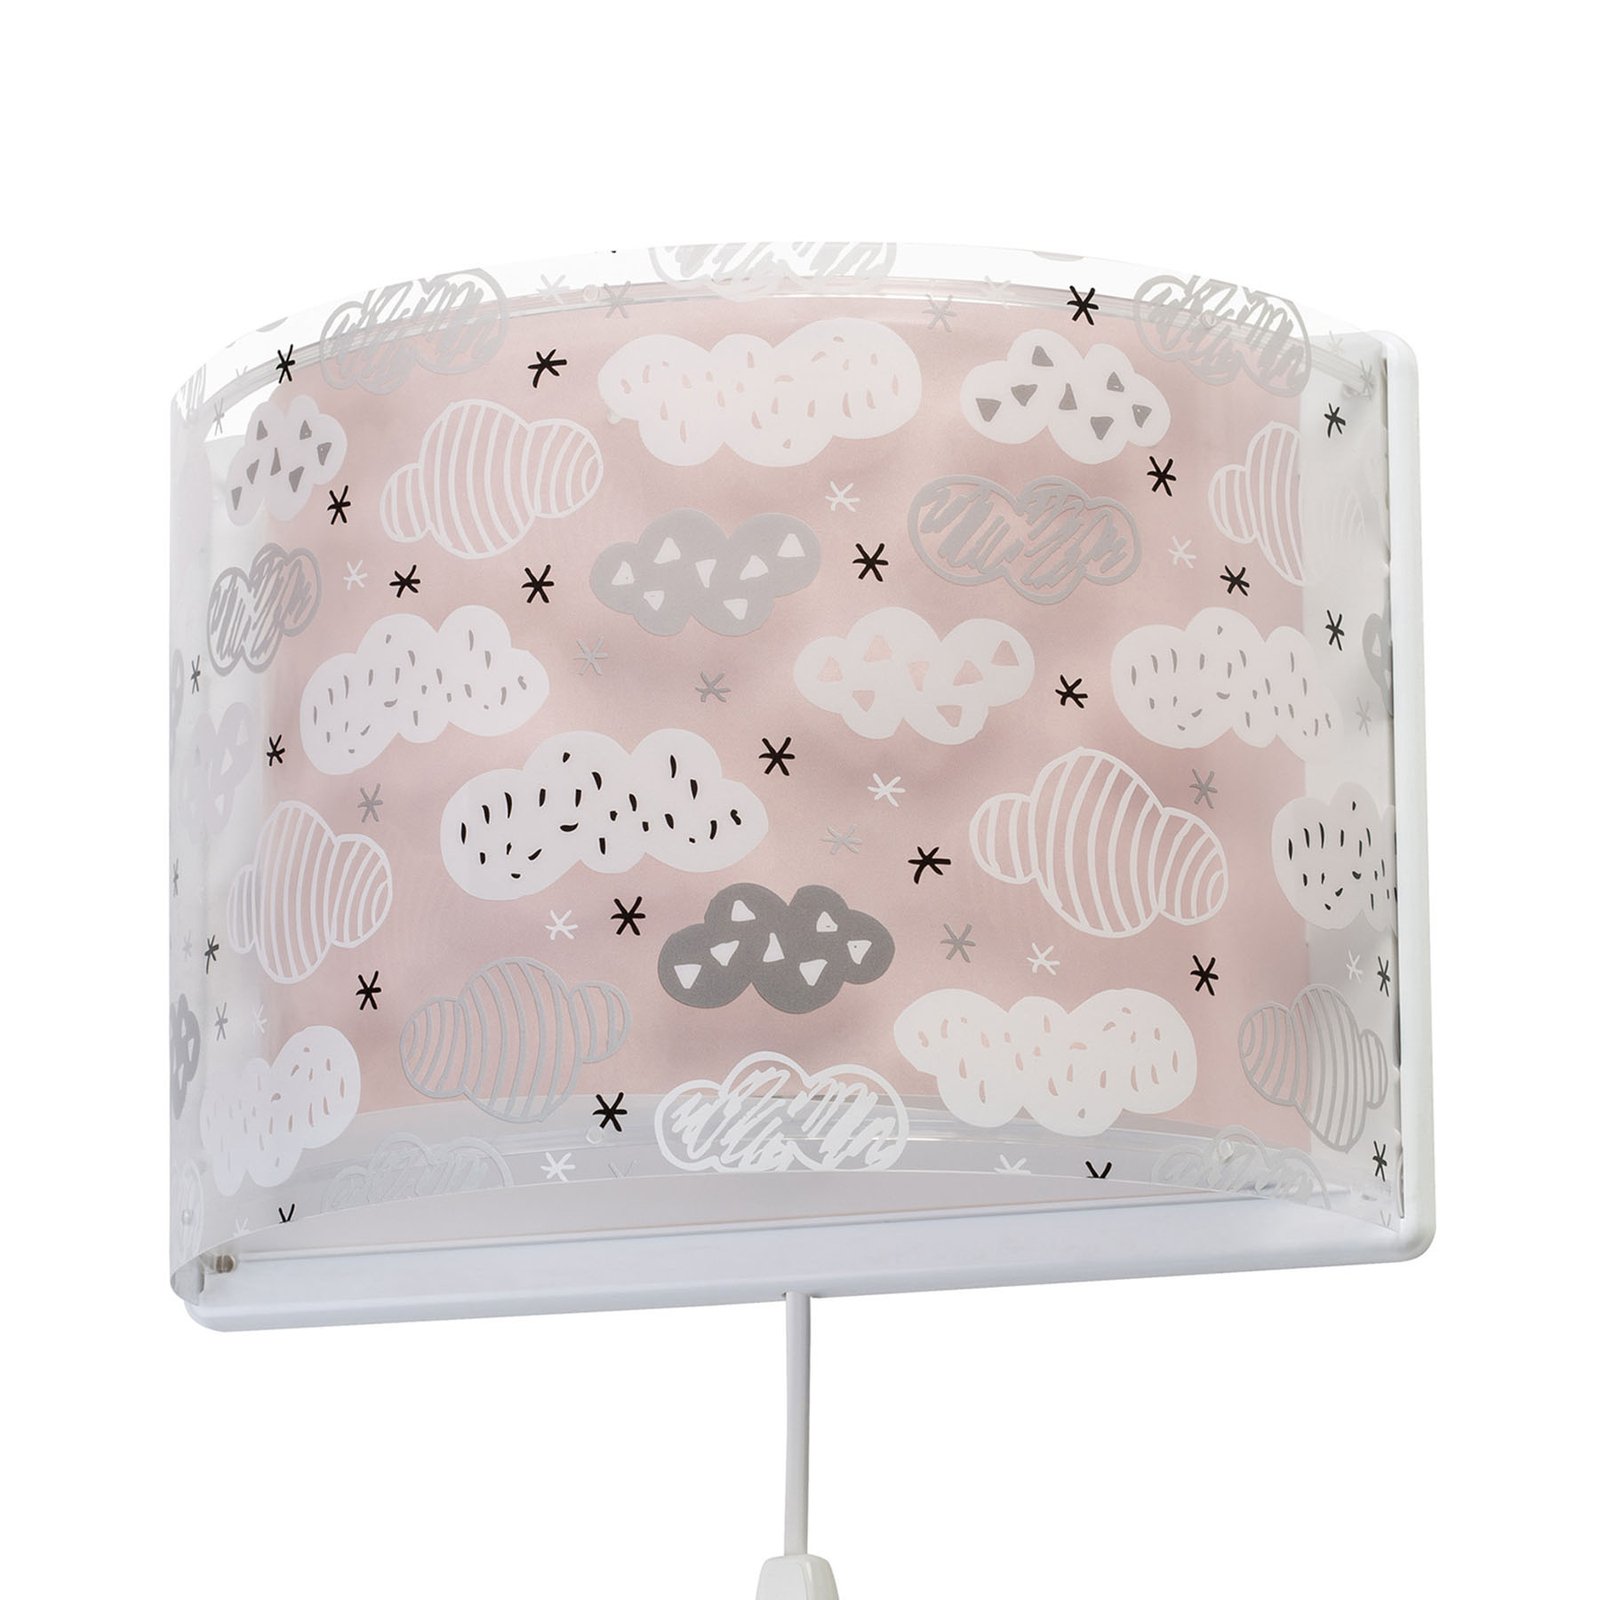 Clouds children’s wall light in pink